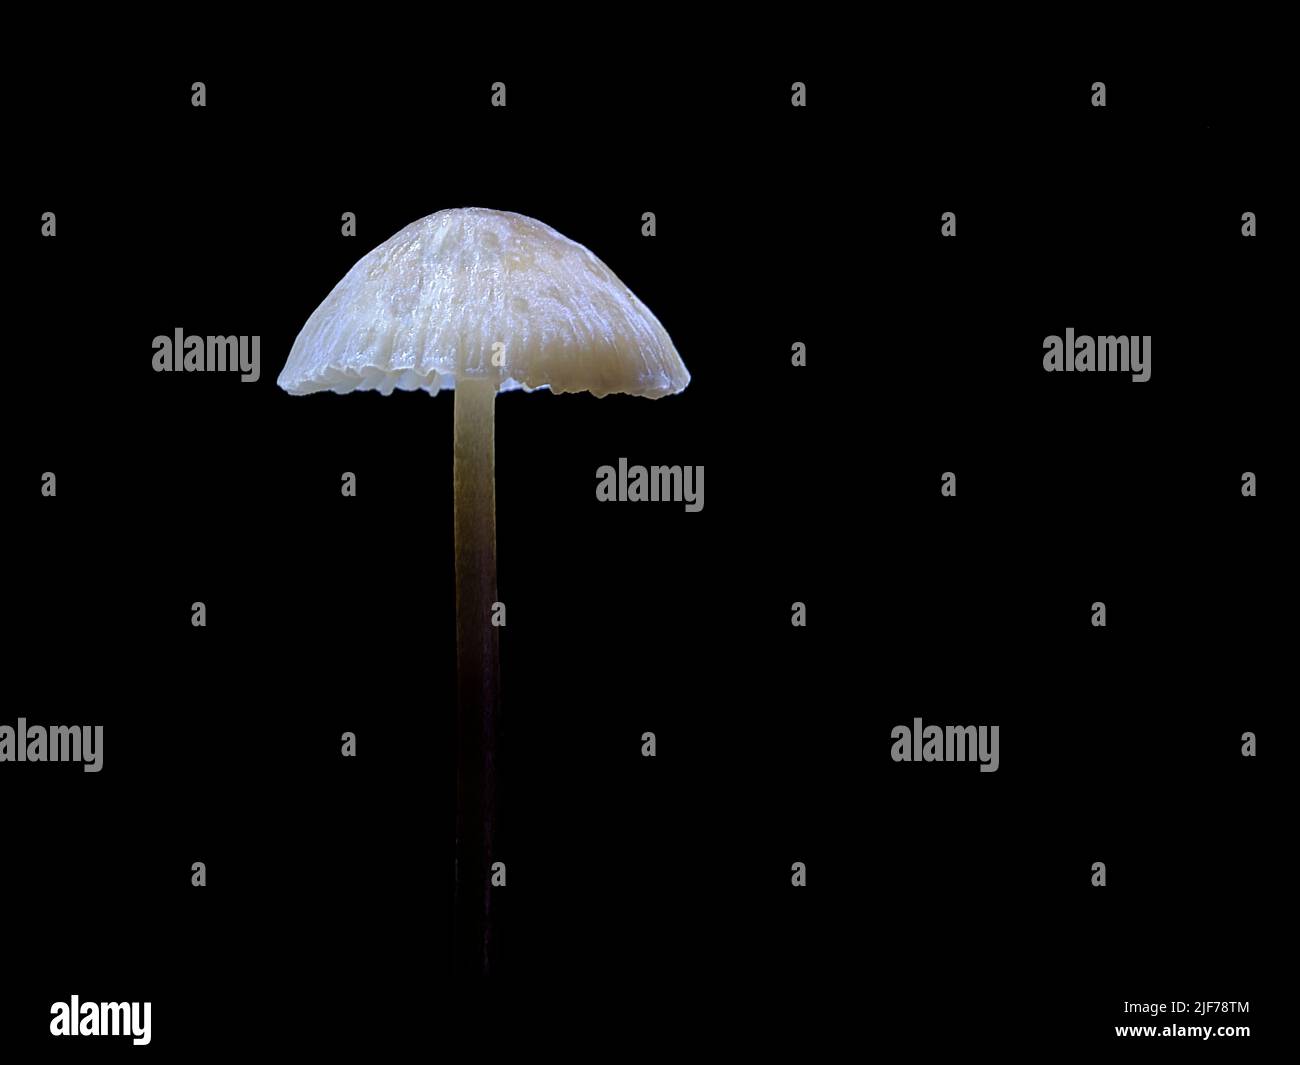 A young Shaggy Inkcap (Coprinus Niveus) illuminated with light showing it scales and bell shape cap in front of a black background Stock Photo